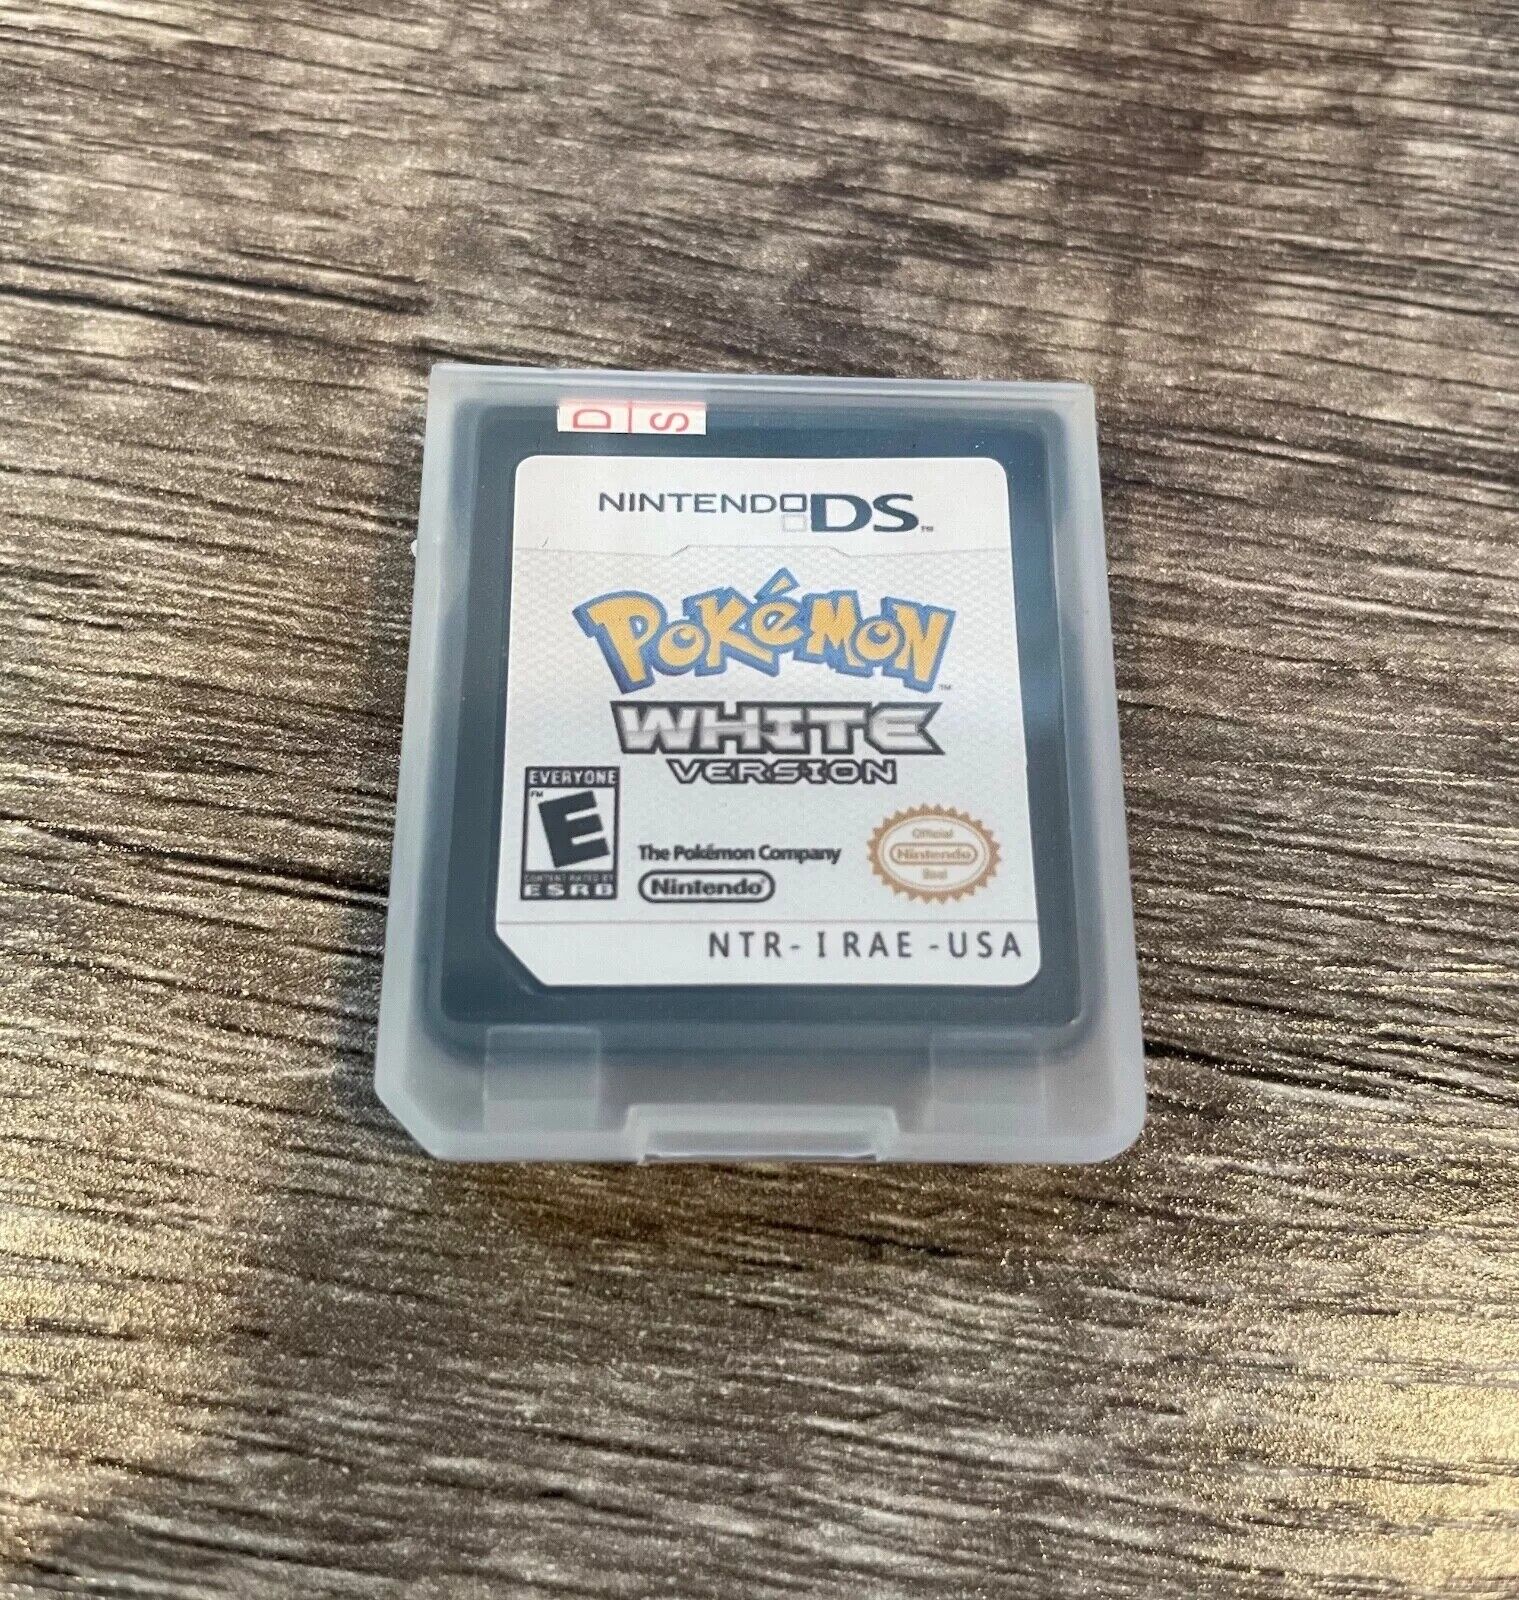 Pokemon White Version for Nintendo DS/NDS/3DS game w/ case (2011) Mint US